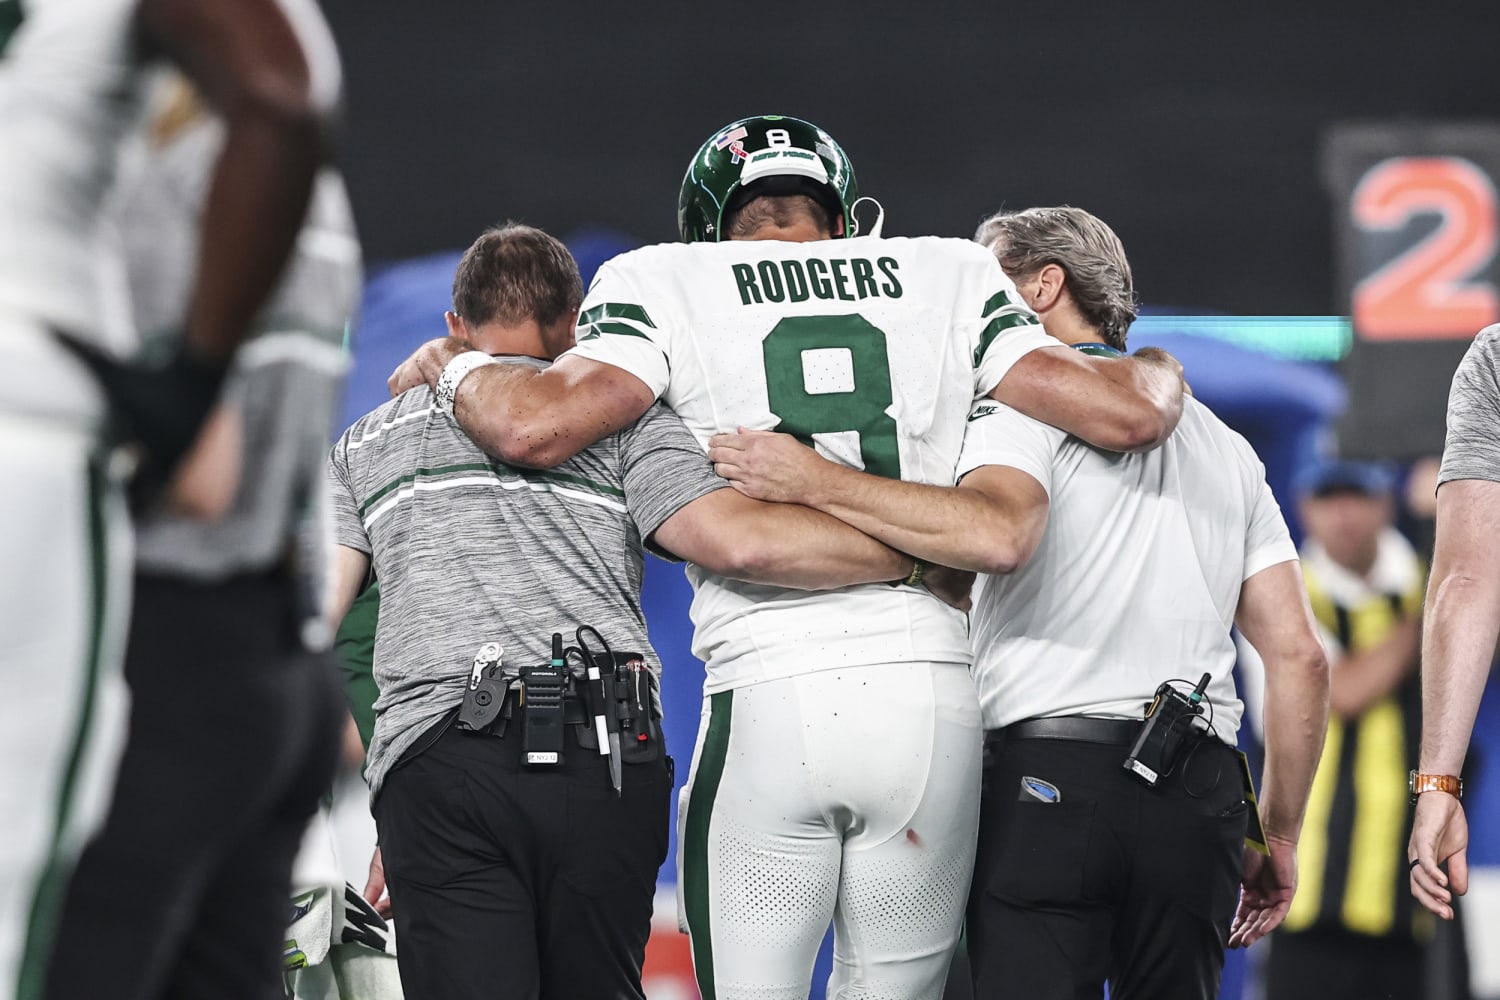 Aaron Rodgers suffers serious injury on the first drive of his New York Jets debut